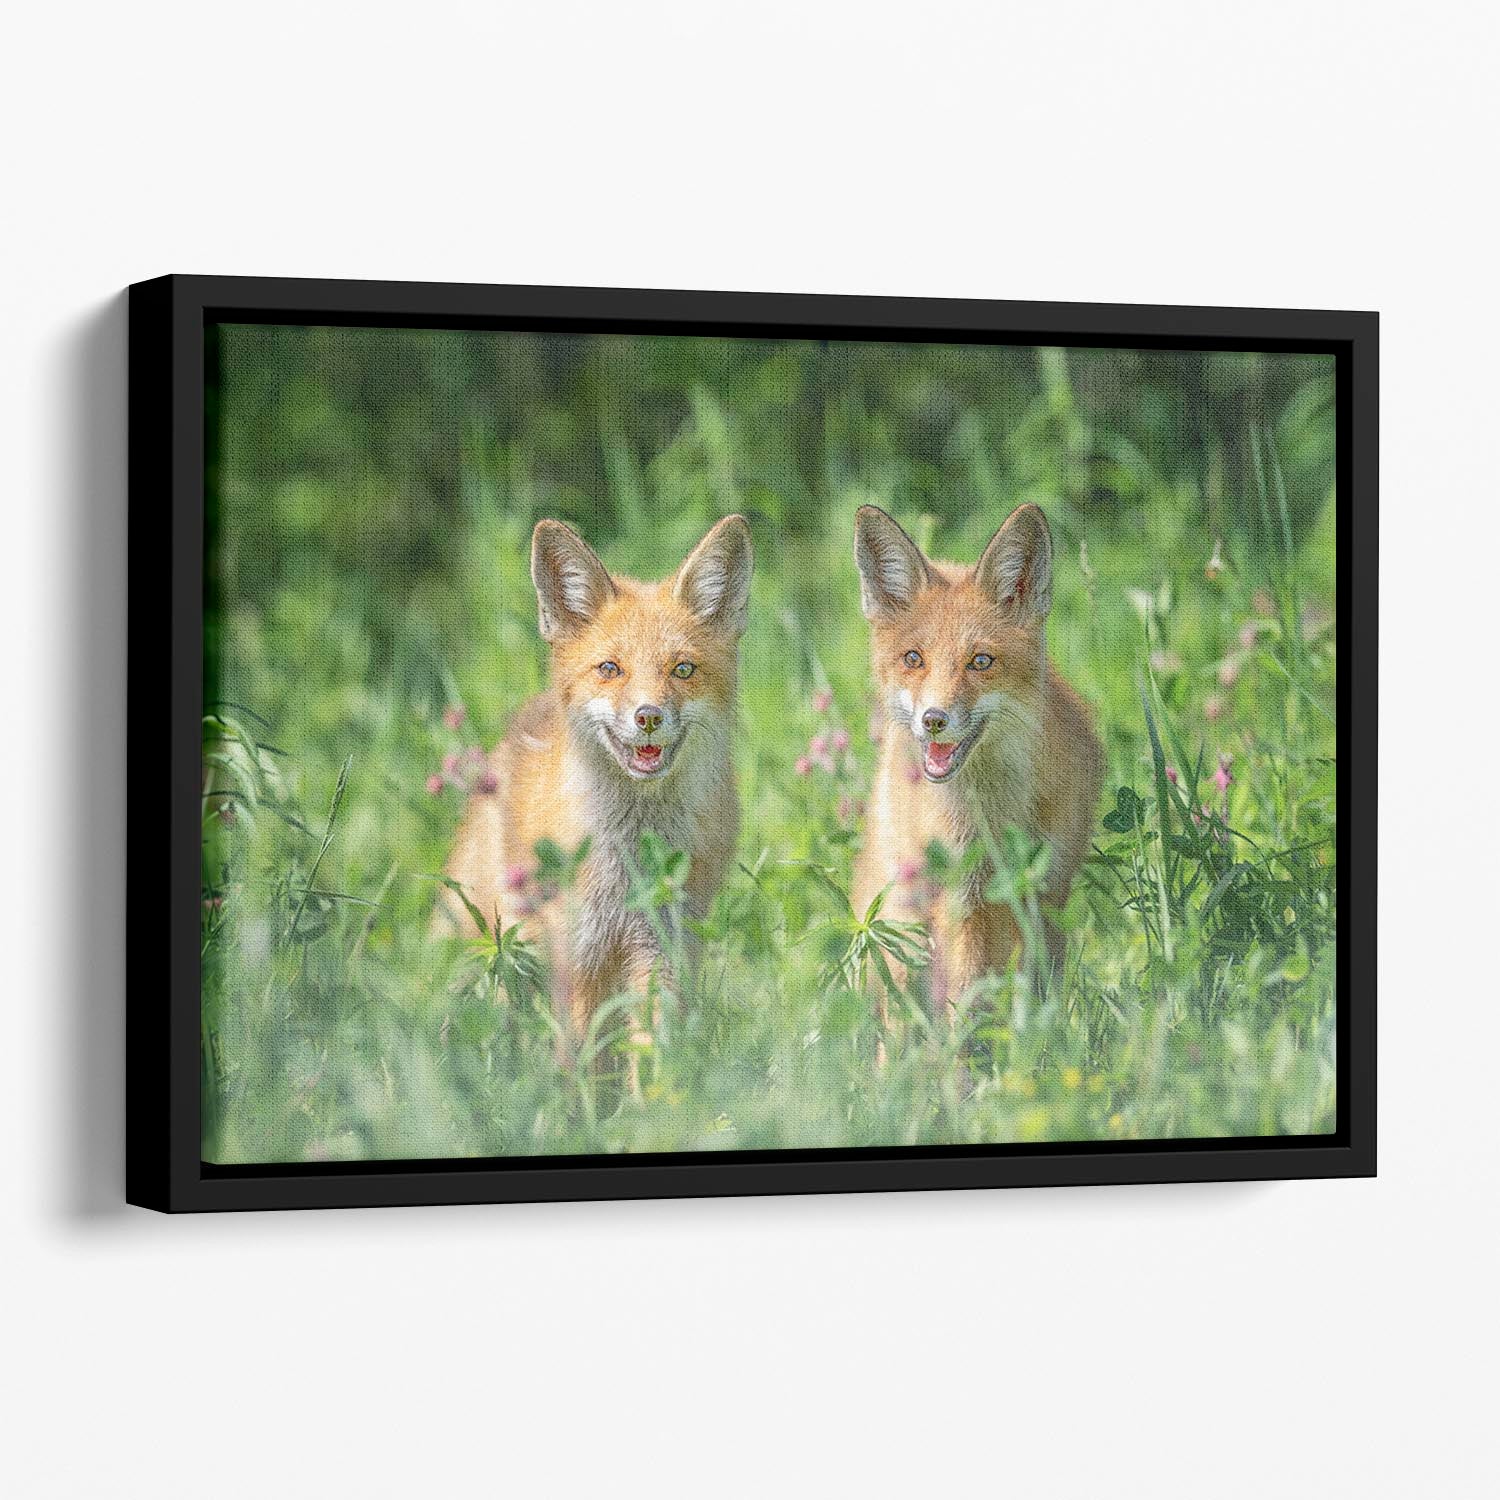 Foxes In Sprint Floating Framed Canvas - Canvas Art Rocks - 1